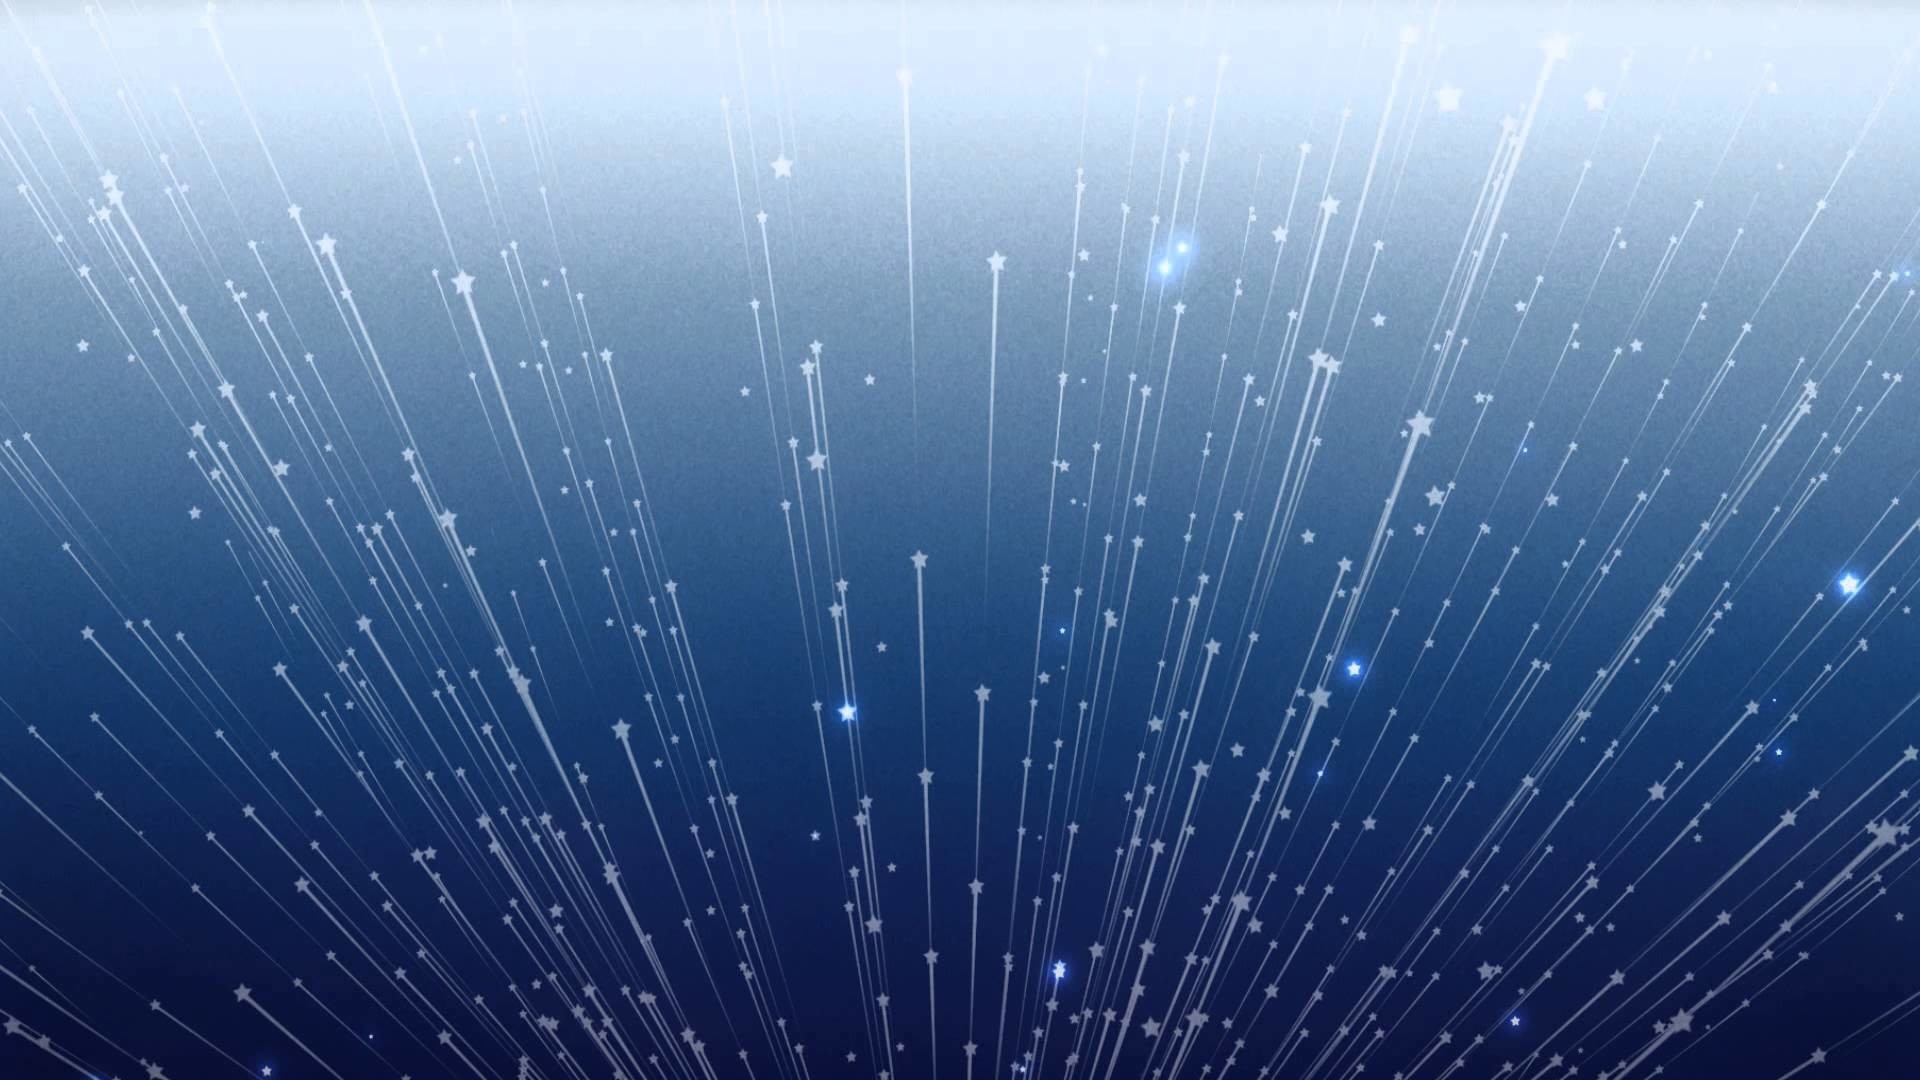 1920x1080 ... Timelapse star sky FULLHD! Free background video effects hd .